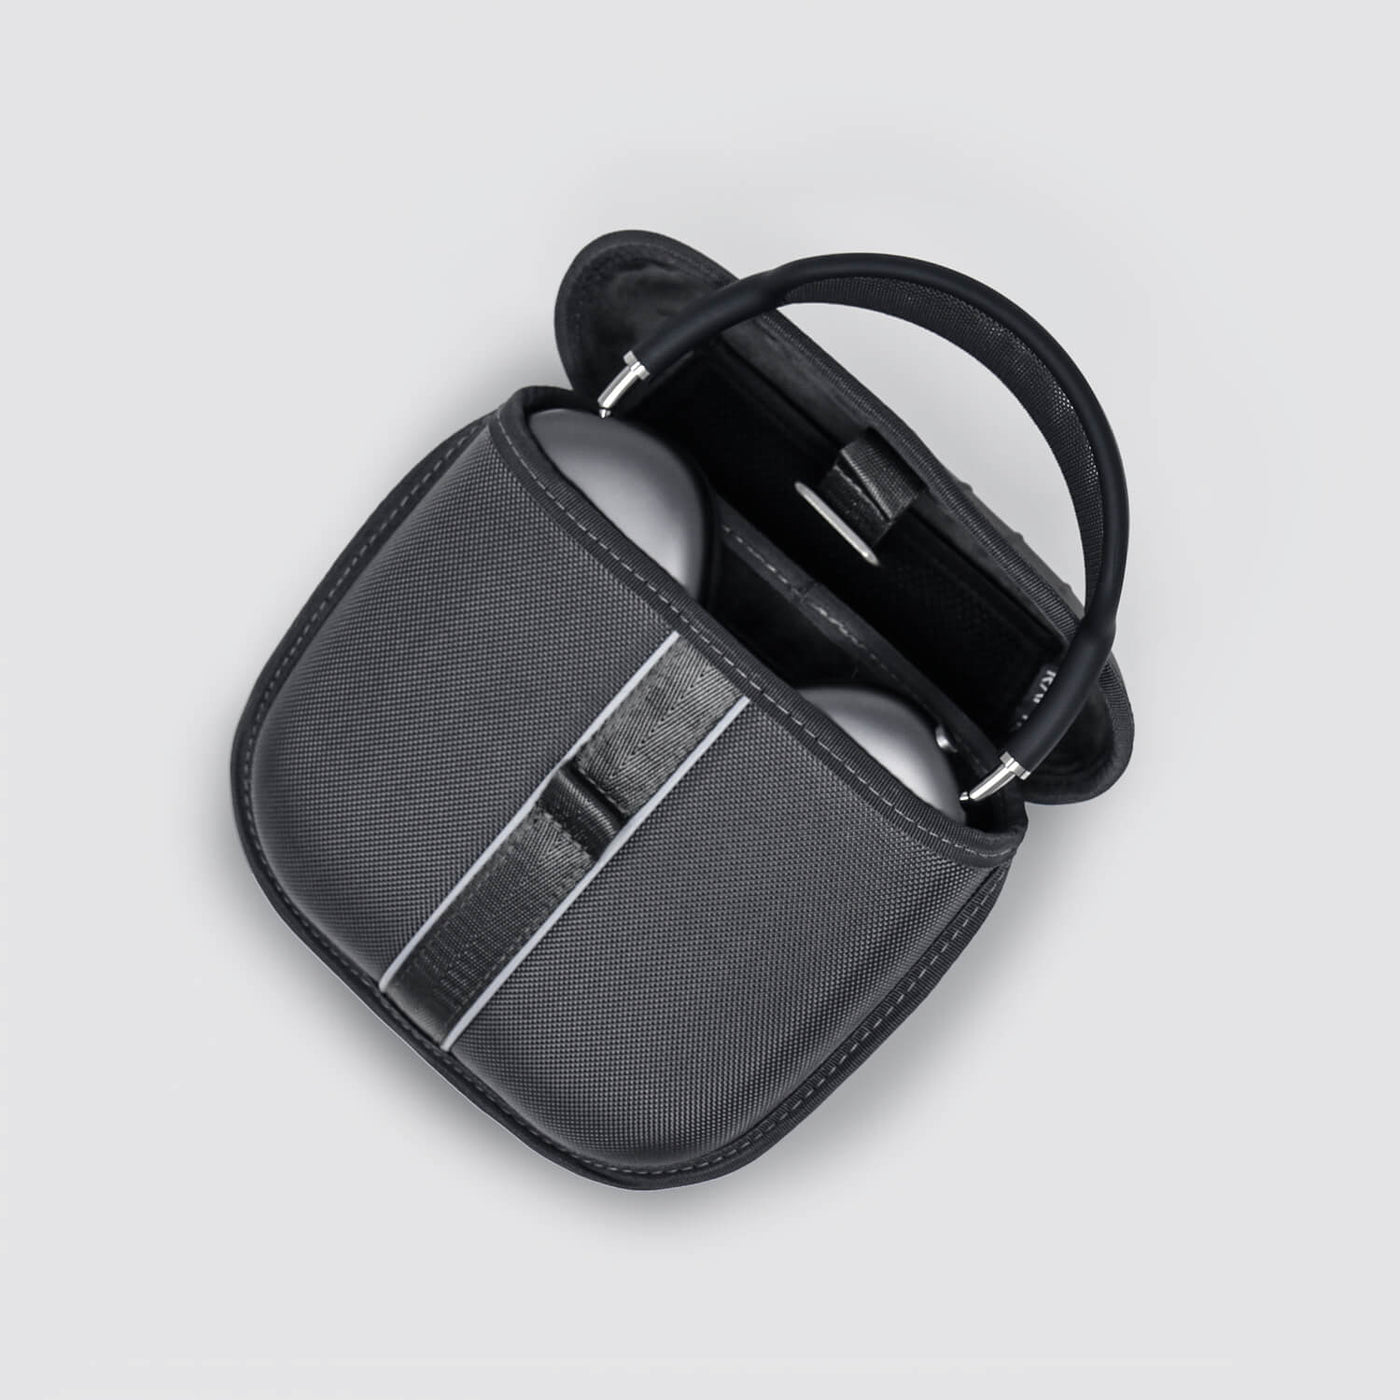 Smartform case for Apple AirPods Max, laying flat on white background, with AirPods Max headphones half inside case